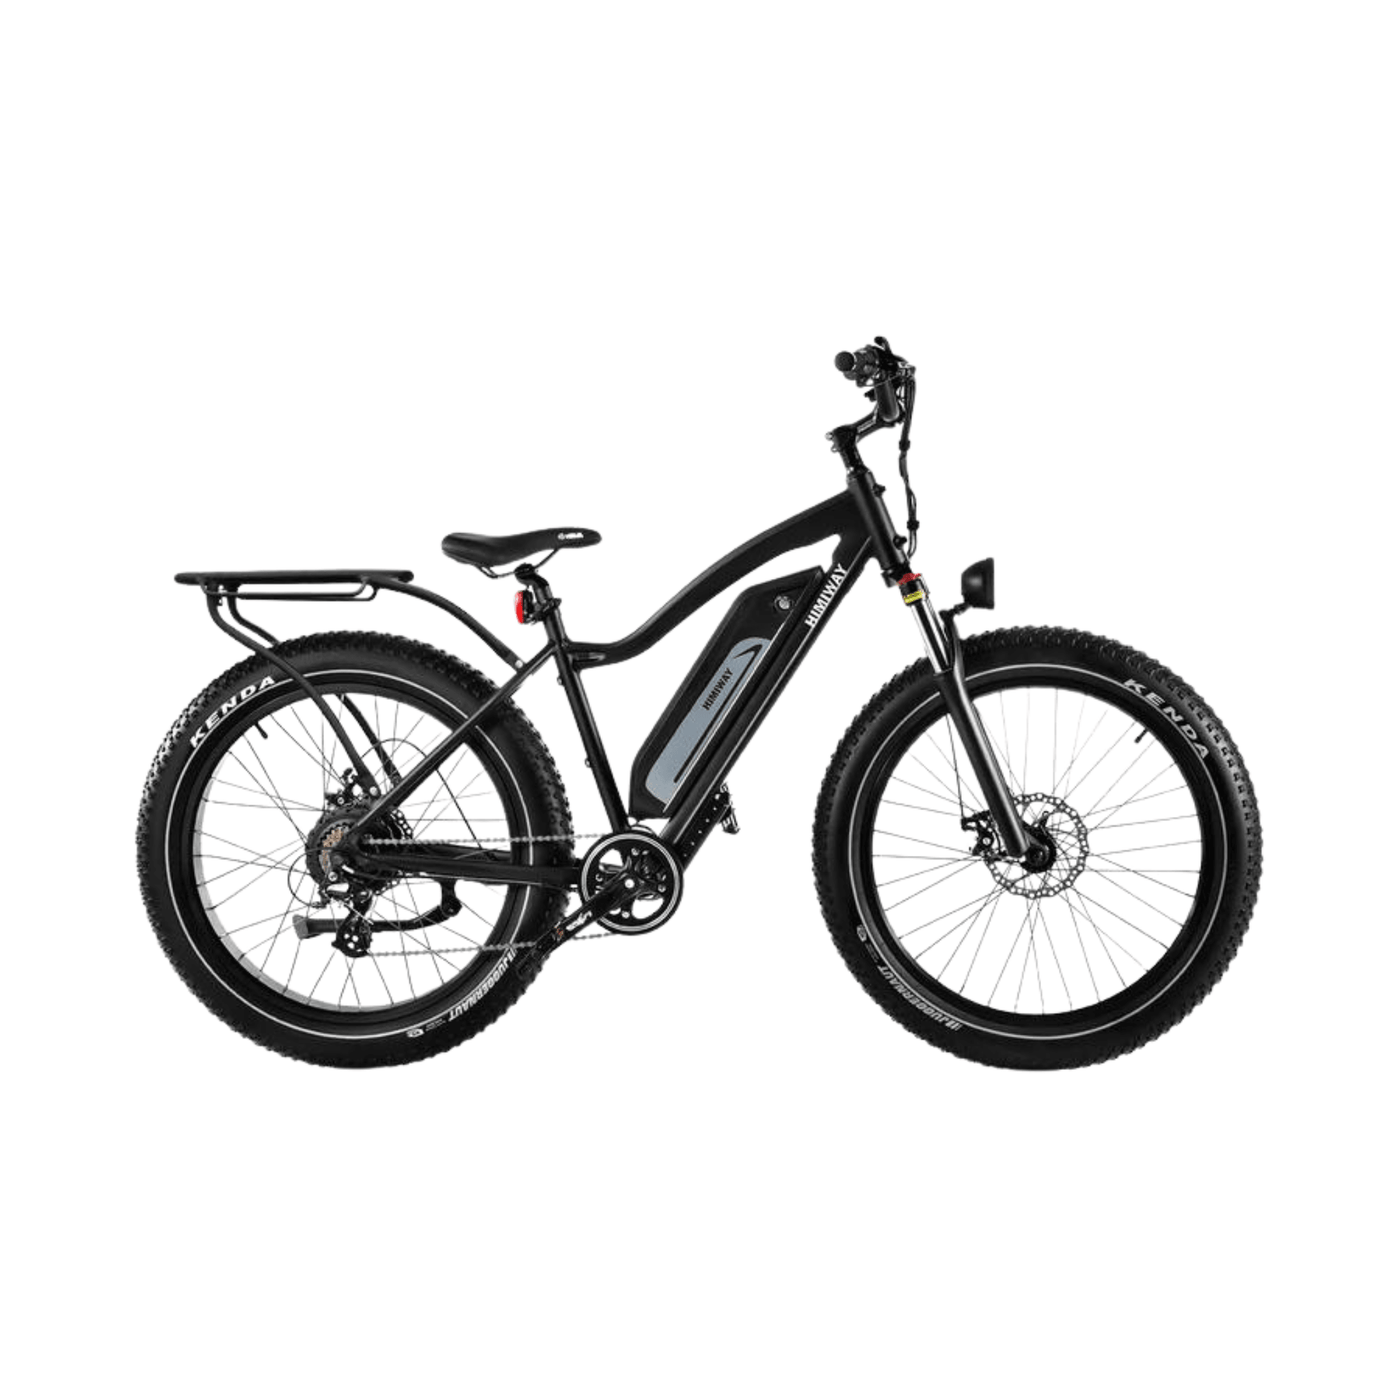 Himiway Cruiser 48V 17.5AH Fat Tire Electric Bike - Rider Cycles 